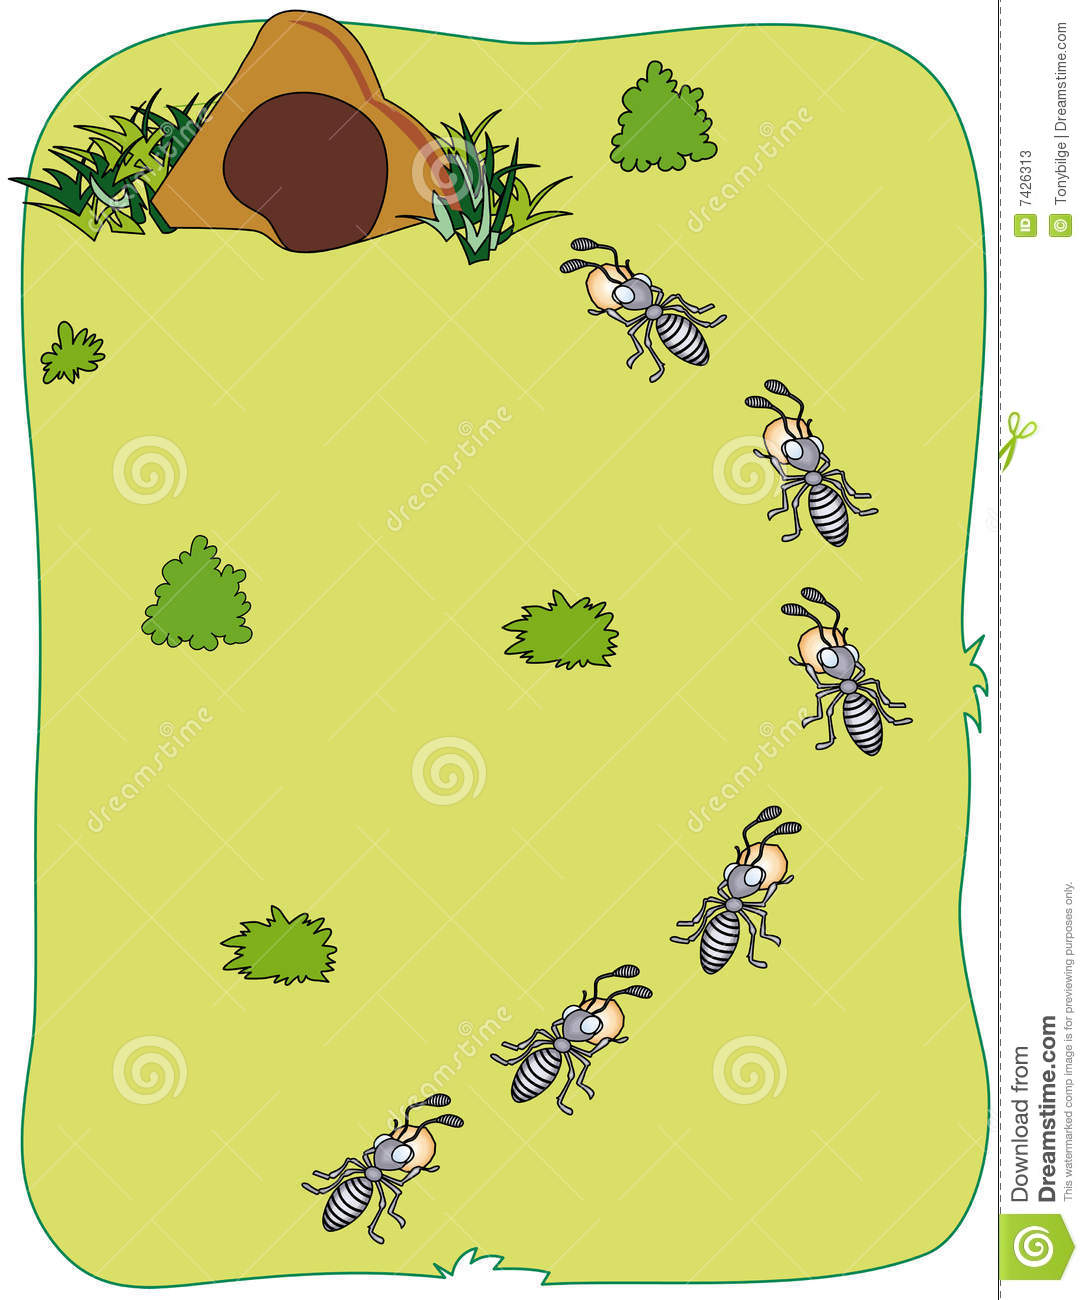 Colony of ants clipart.